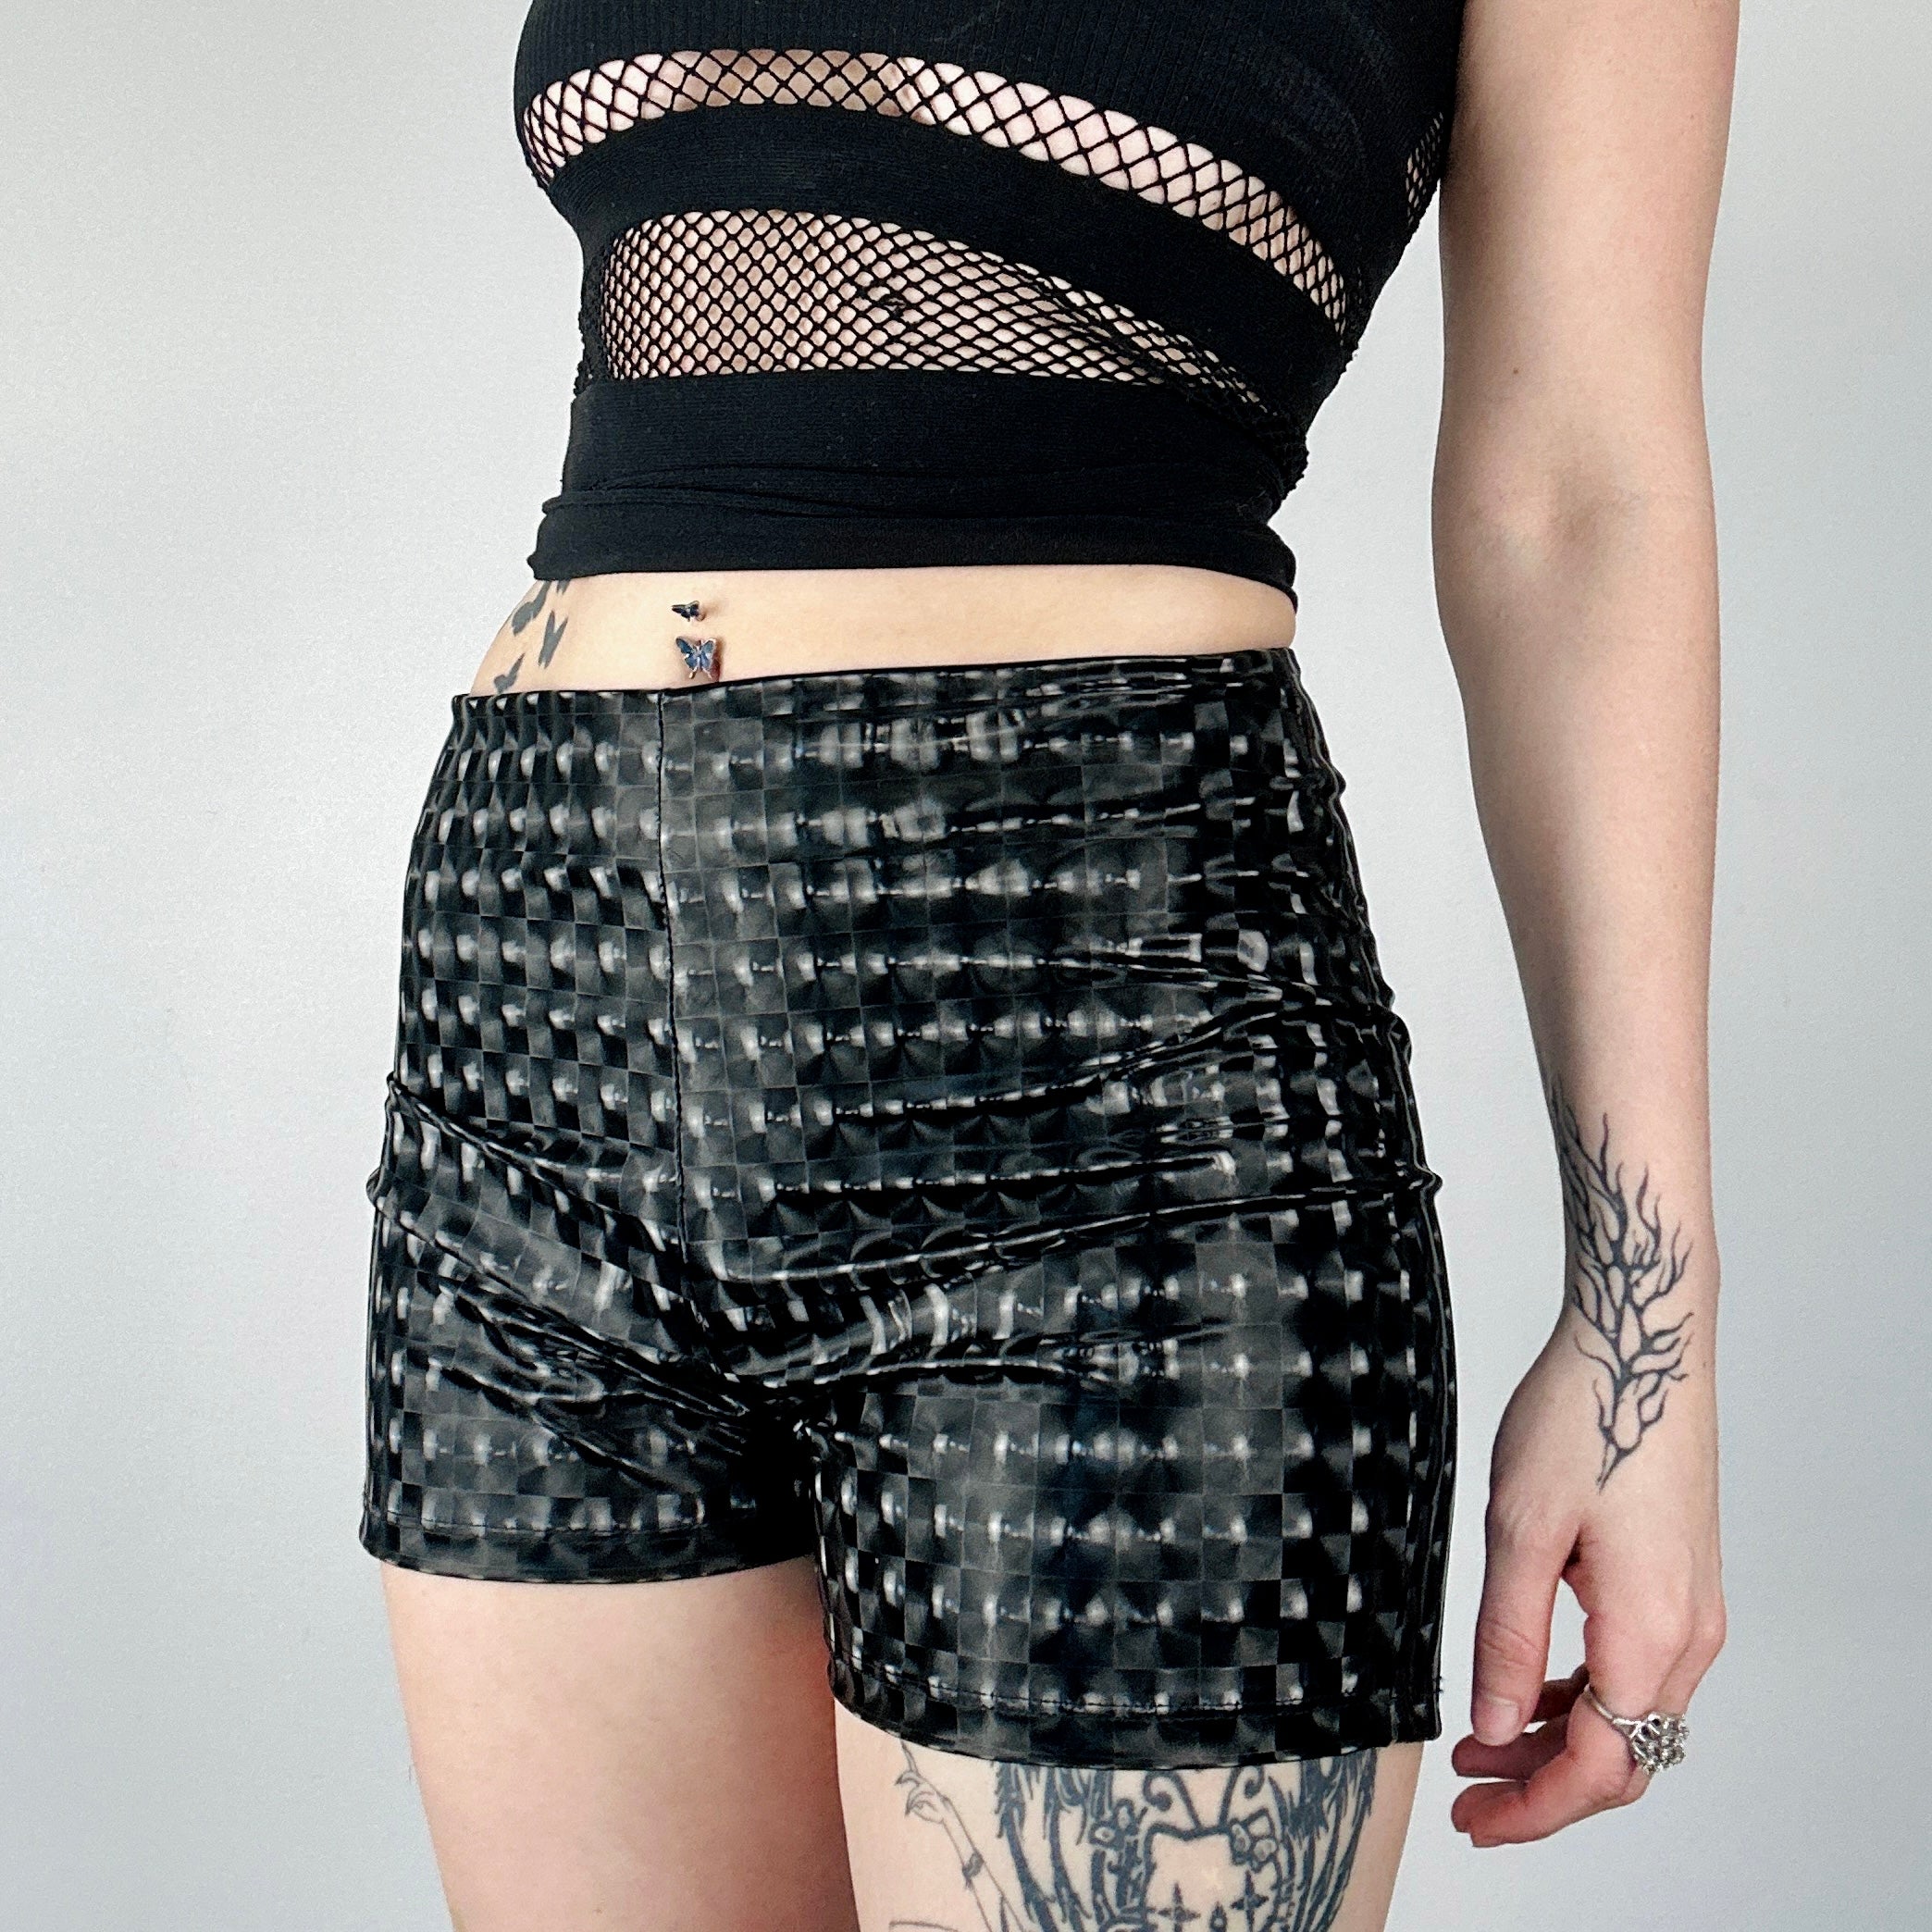 Lenticular Holographic Shorts (S/M)